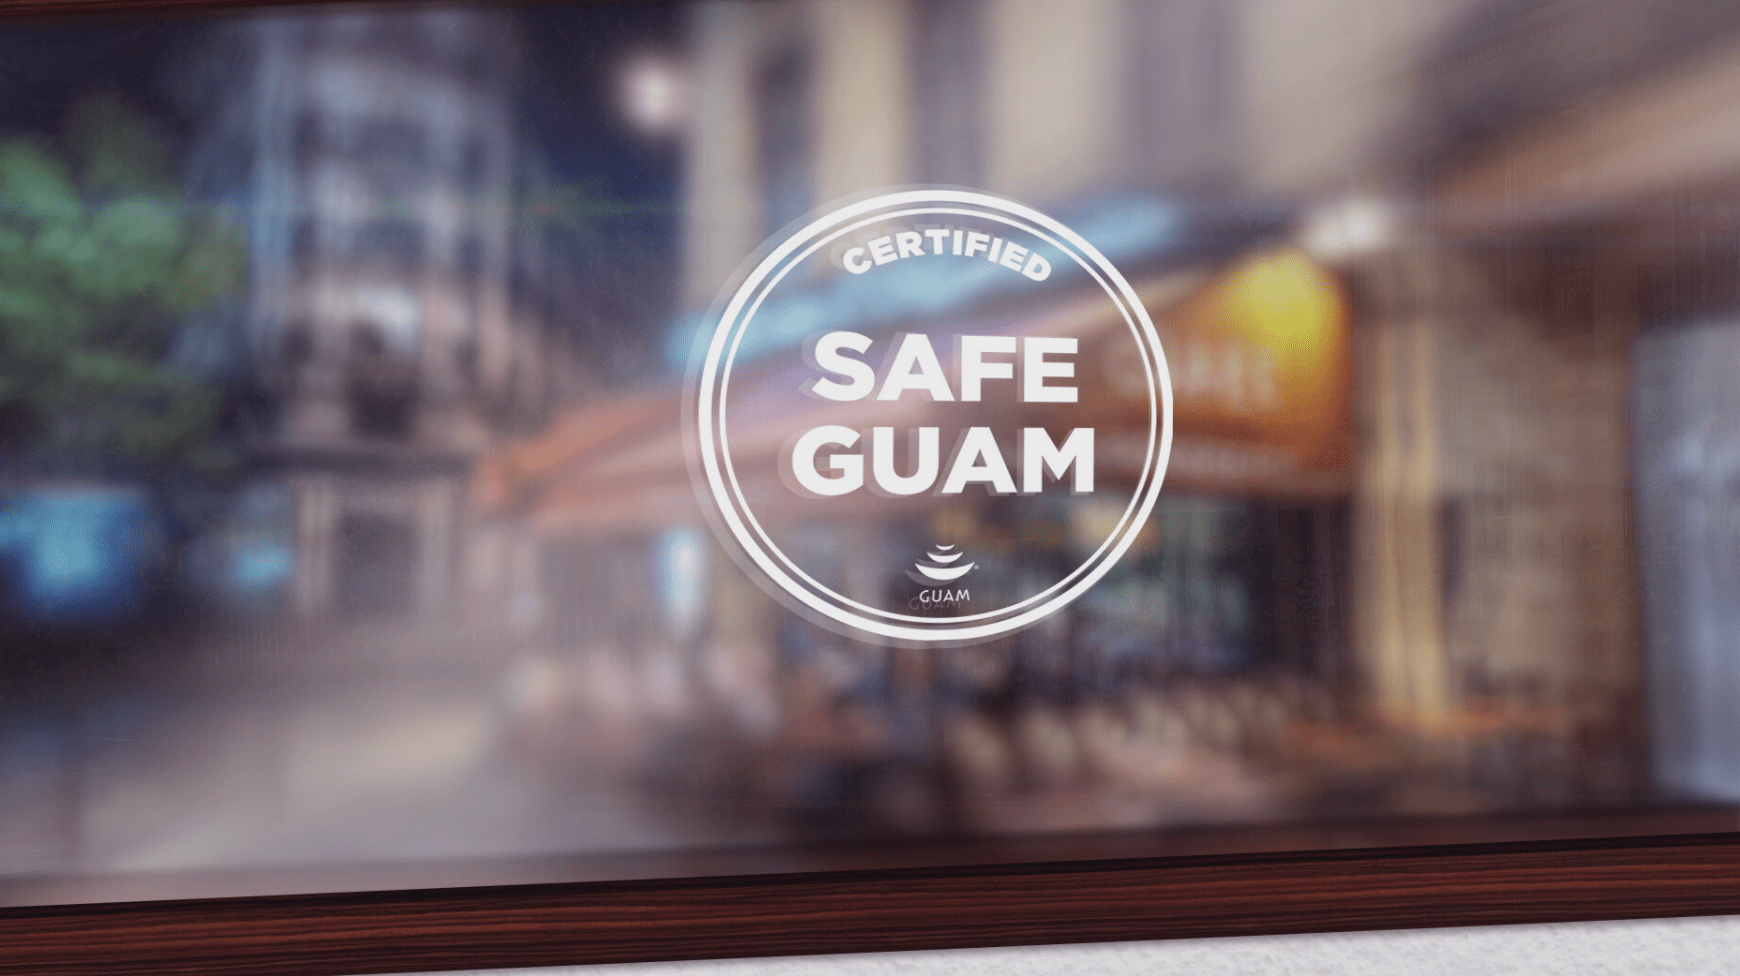 Photo of a restaurant that's Guam safe certified